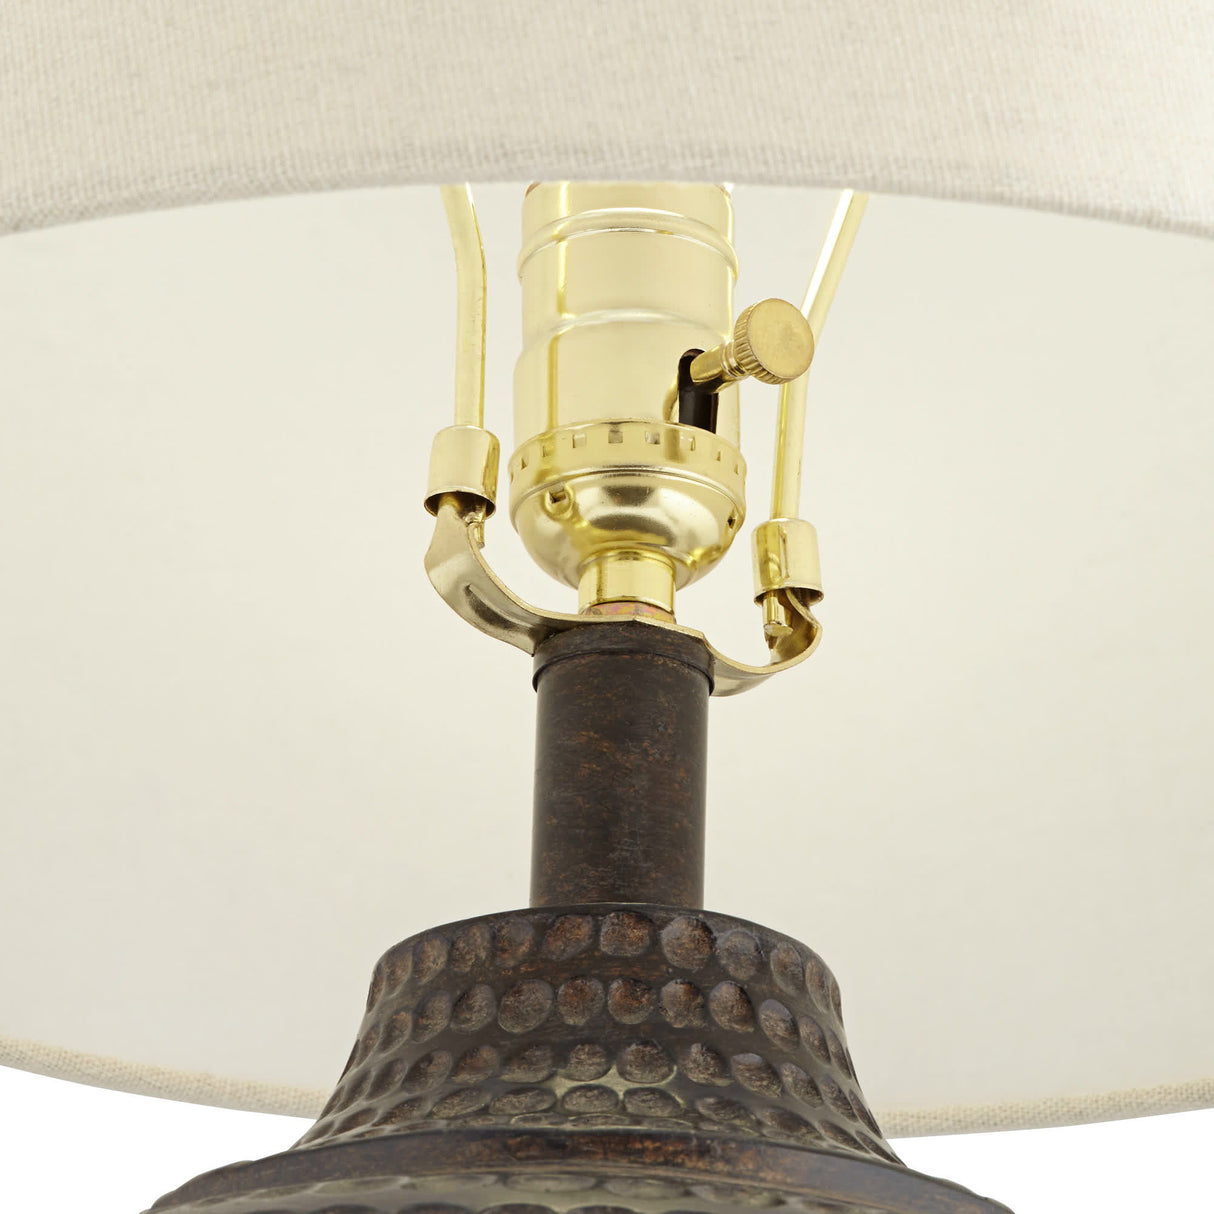 Alese - Table Lamp - 25" - Brown